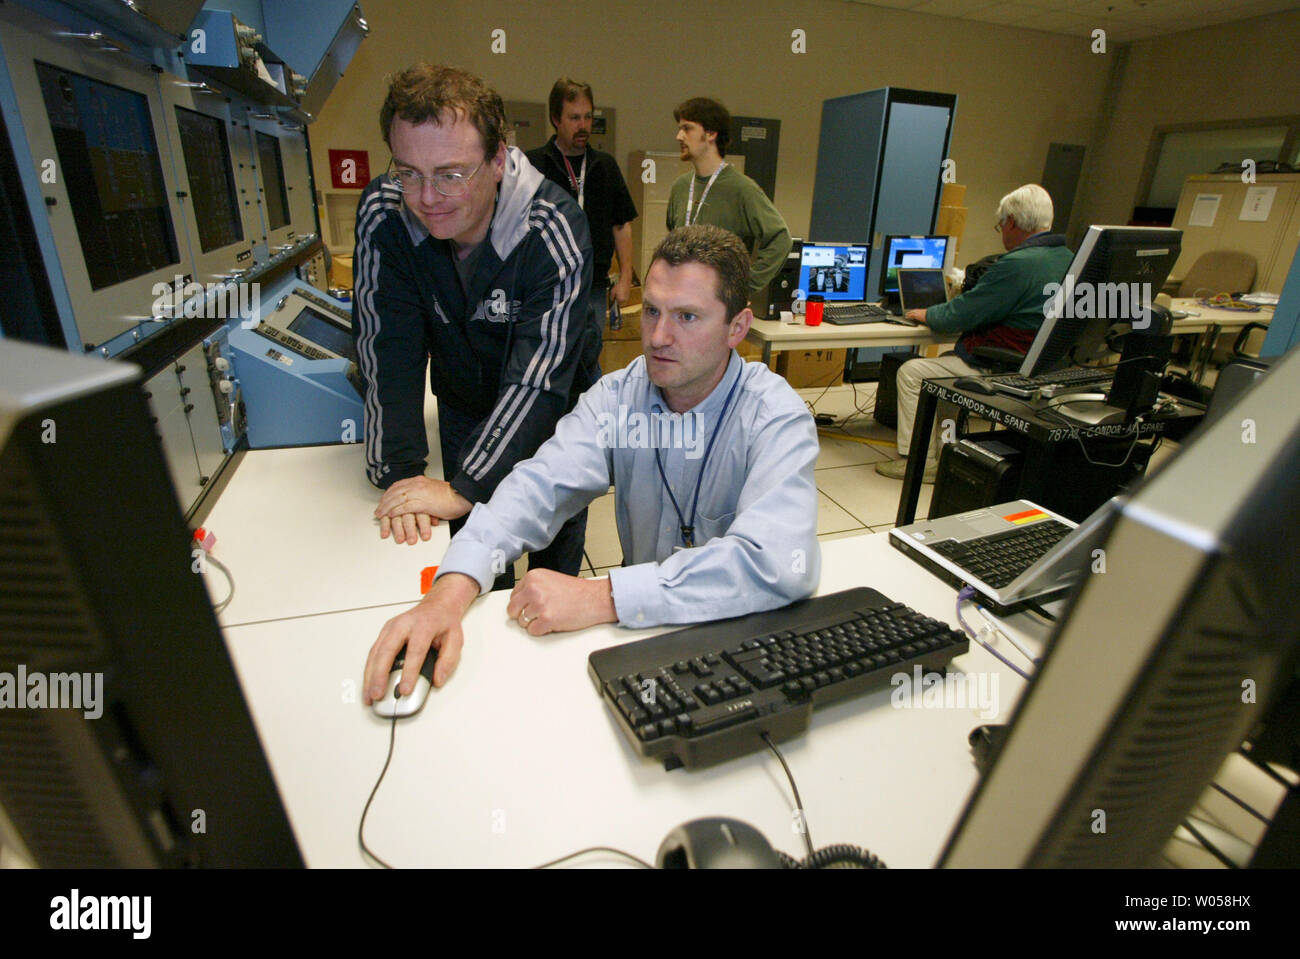 Adrian Hughes (R) and Dirk Lang (L) use a computer to test Avionics equipment in the Avionics Integration Lab at Boeing Field in Seattle on May 22, 2007.  The electrical and hydraulic systems for the all-new Boeing 787 Dreamliner aircraft will be installed at the Everett plant in August 2007. (UPI Photo/Jim Bryant) Stock Photo